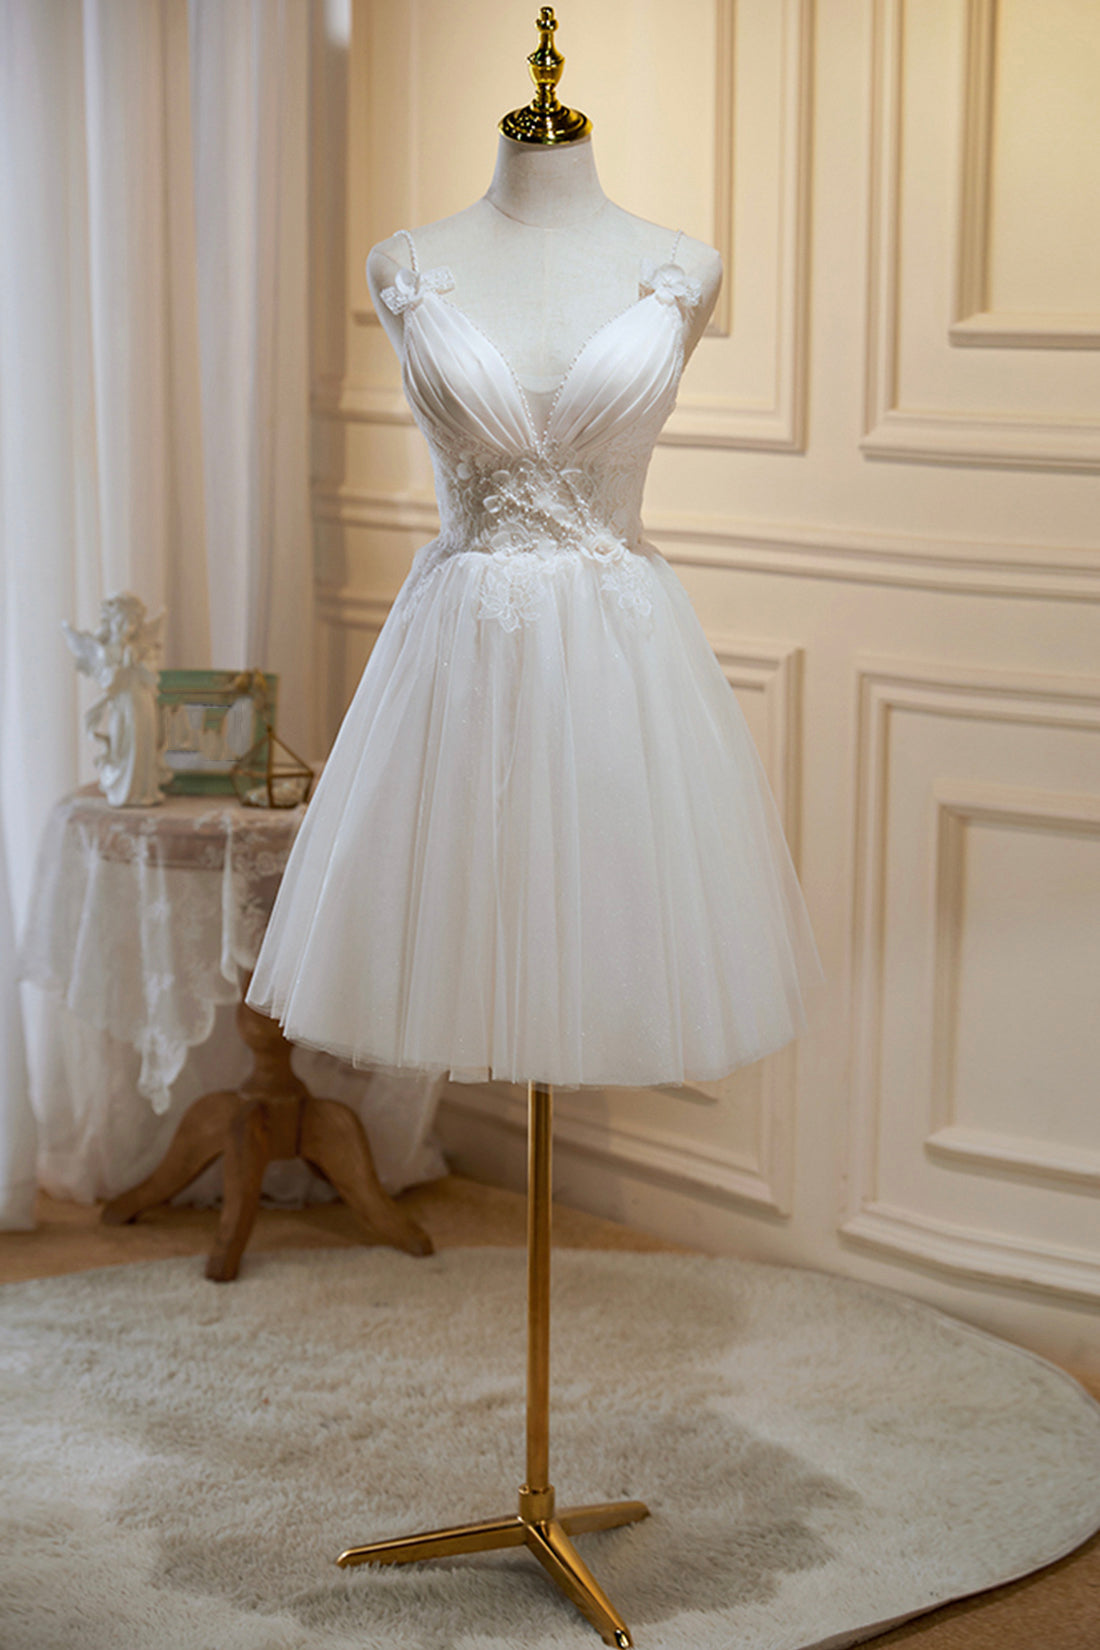 Prom Dress Types, Ivory V Neck Tulle Lace Knee Length Prom Dress, Cute A-Line Homecoming Dress